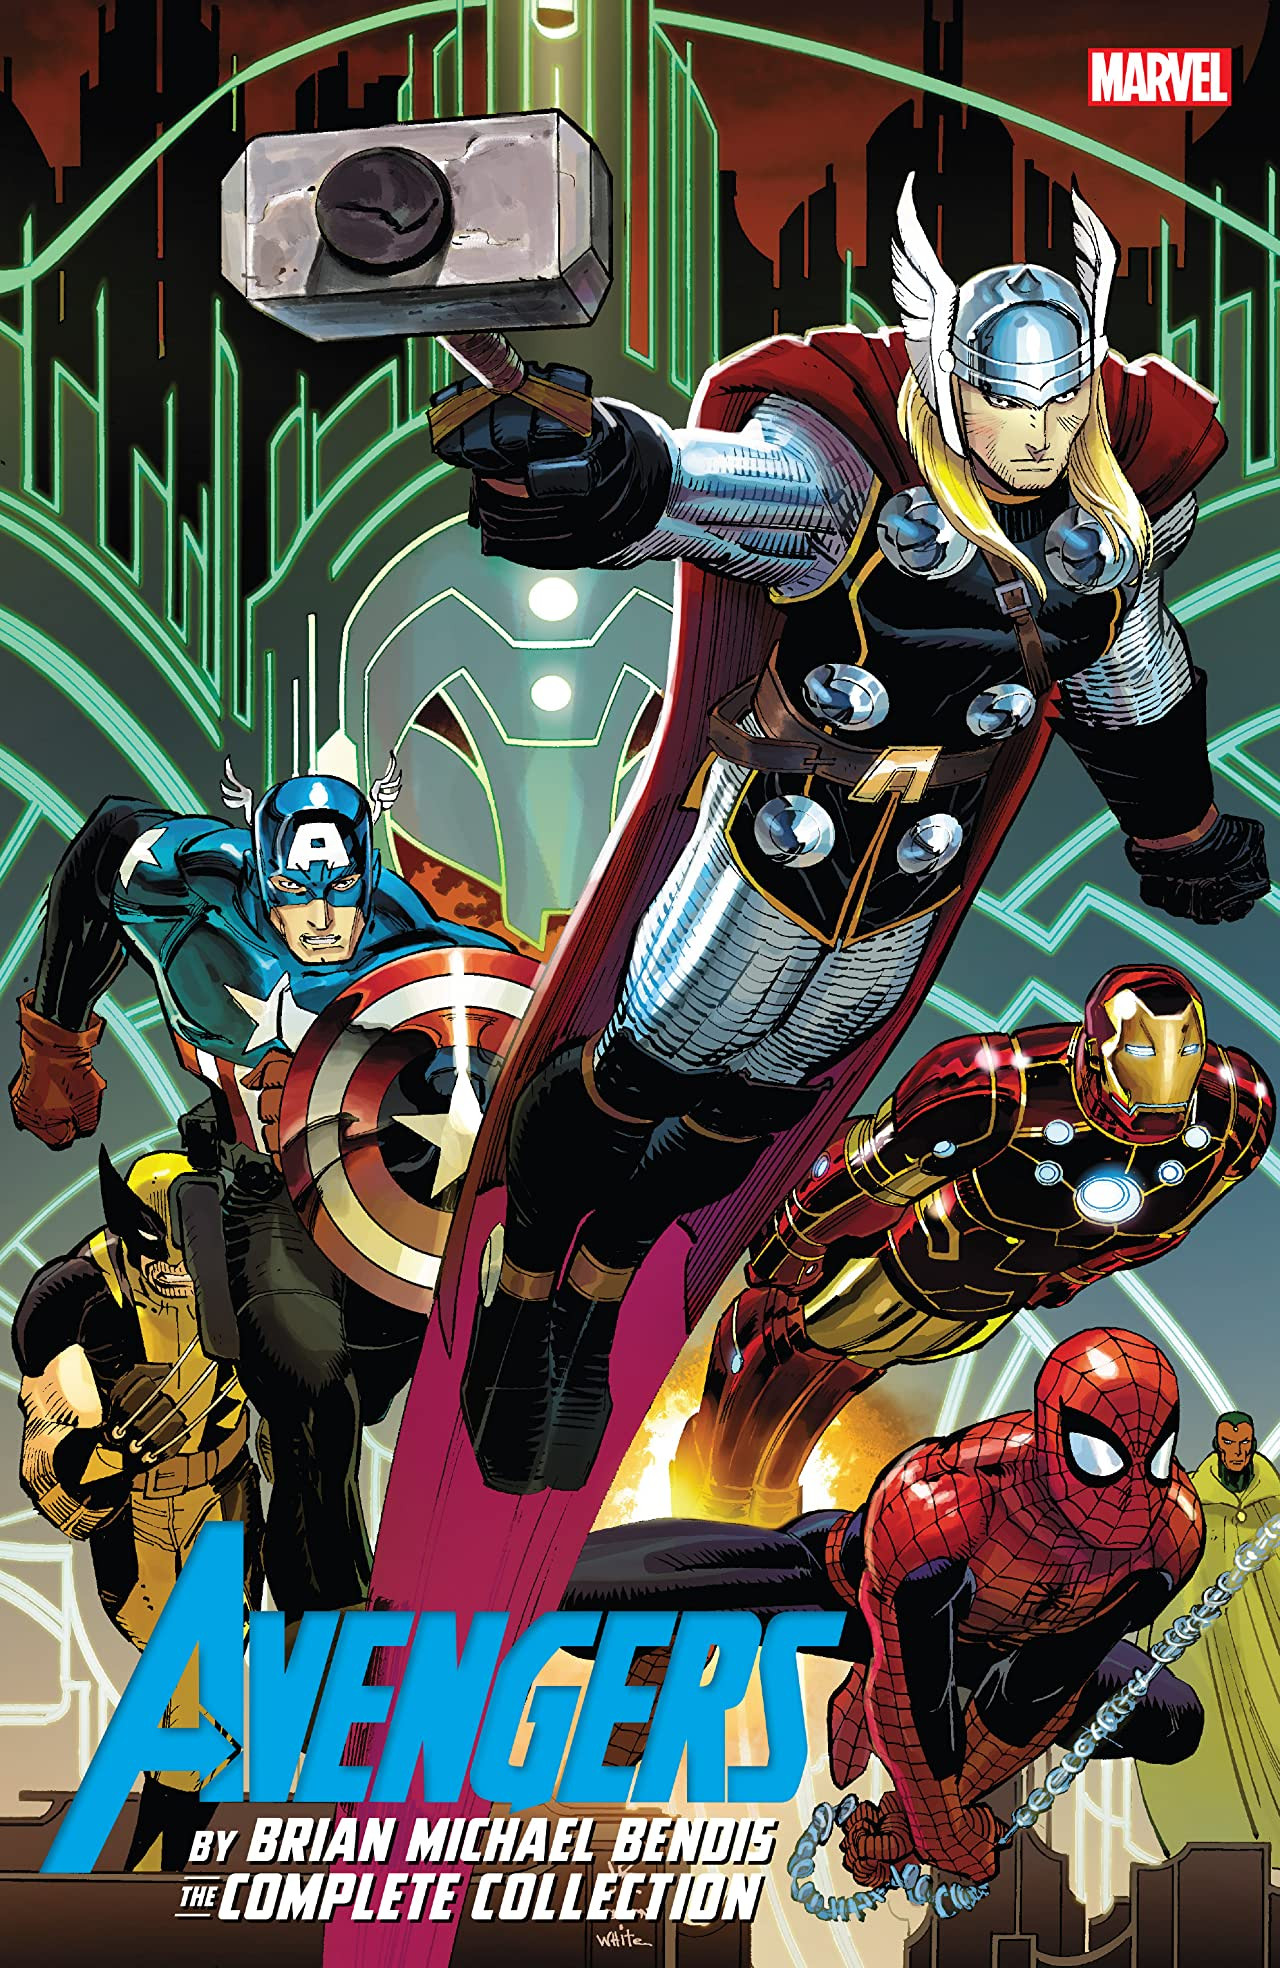 The New Avengers, Vol. 1 by Brian Michael Bendis